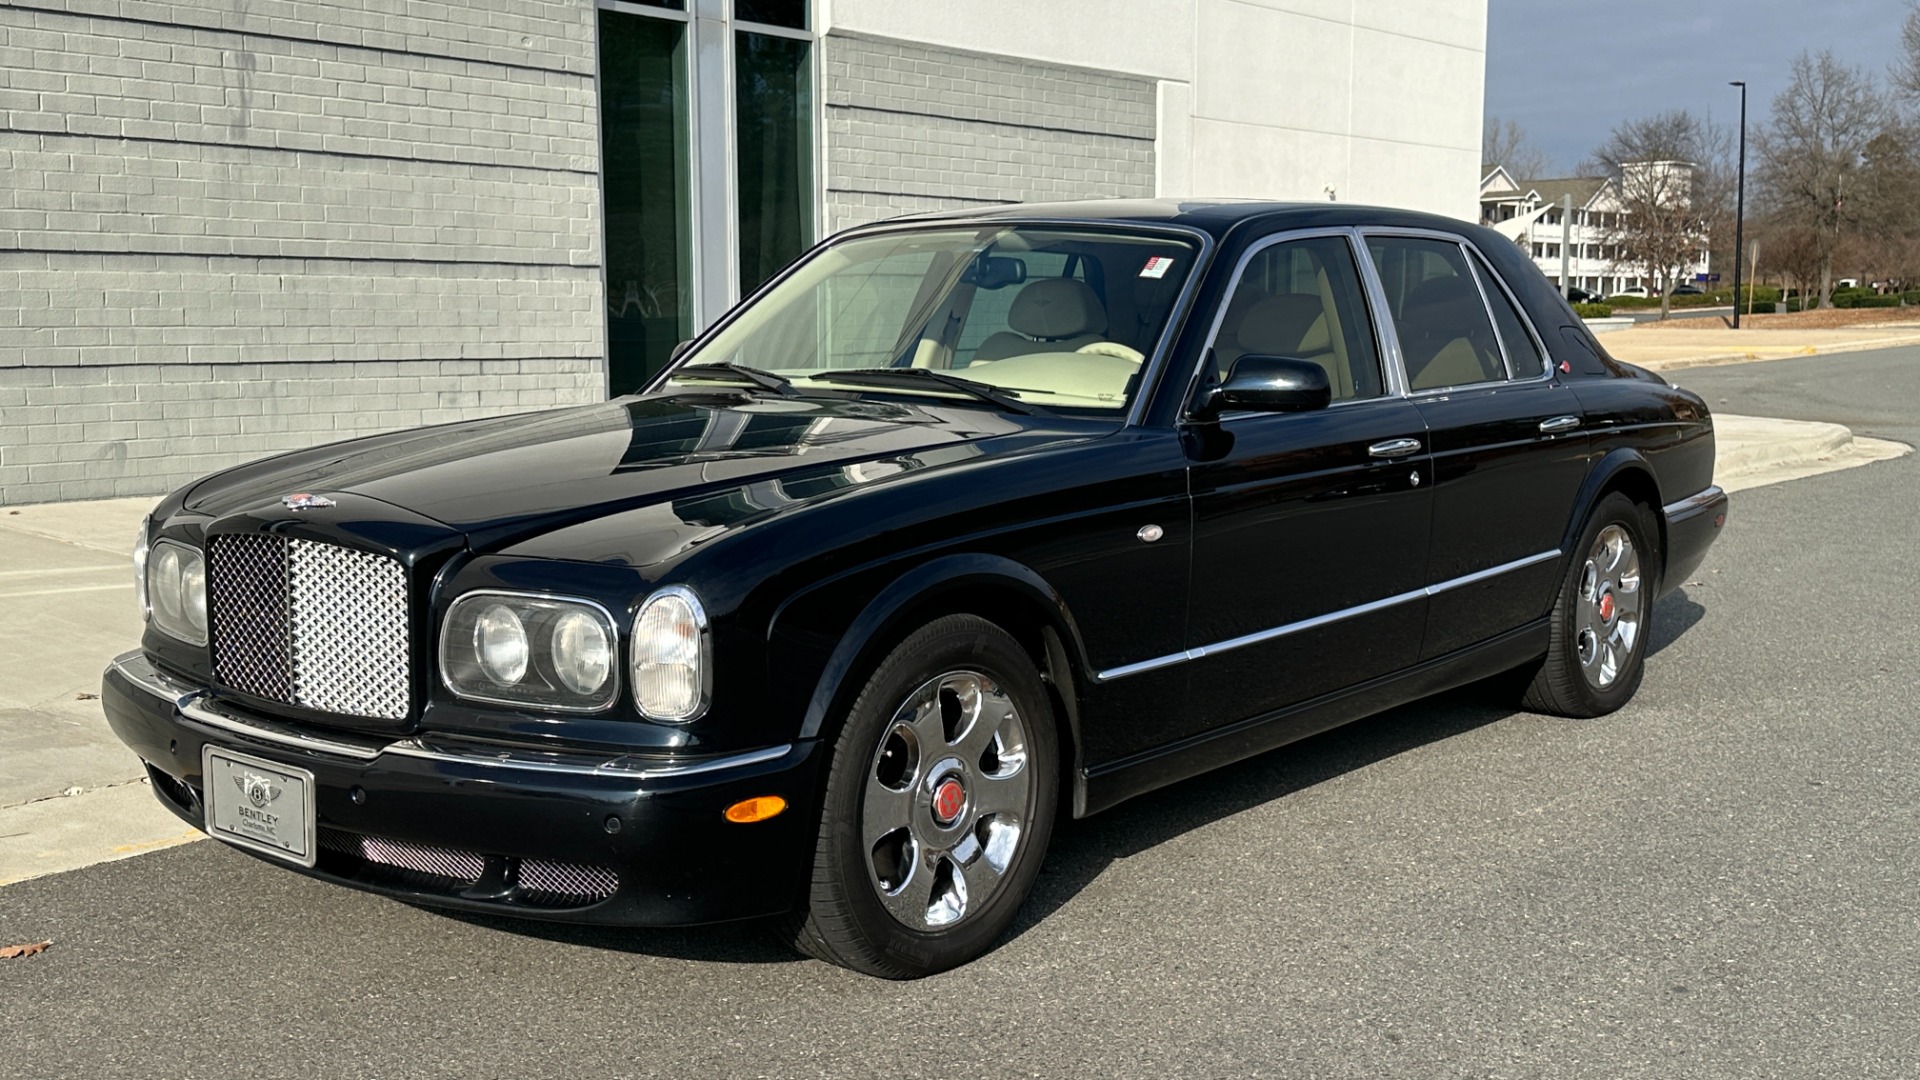 Used 2001 Bentley ARNAGE RED LABEL 6.75L V8 / TURBO / FULL LEATHER / WOOD TRIM / HEATED SEATS / SUNR for sale $26,999 at Formula Imports in Charlotte NC 28227 2